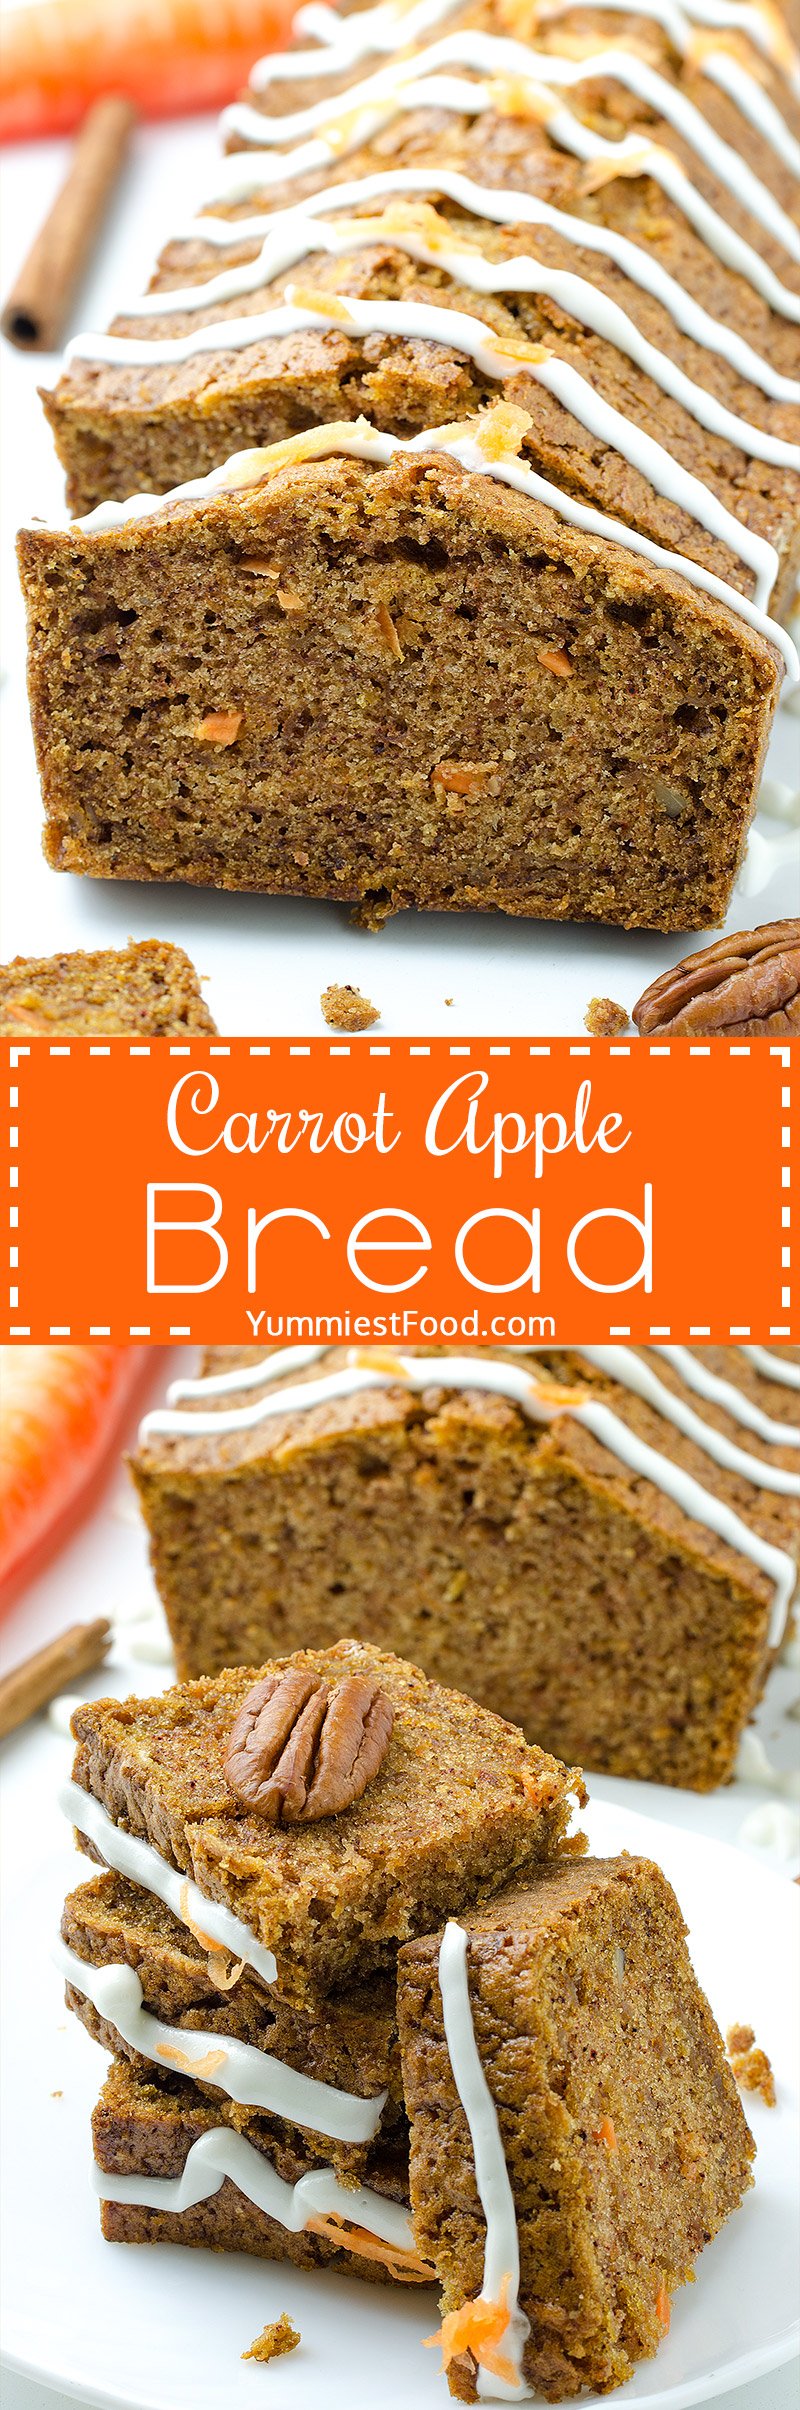 Carrot Apple Bread - yummy and very quick bread. Carrot Apple Bread is ideal choice for healthy breakfast. Super Carrot and Apple combination.